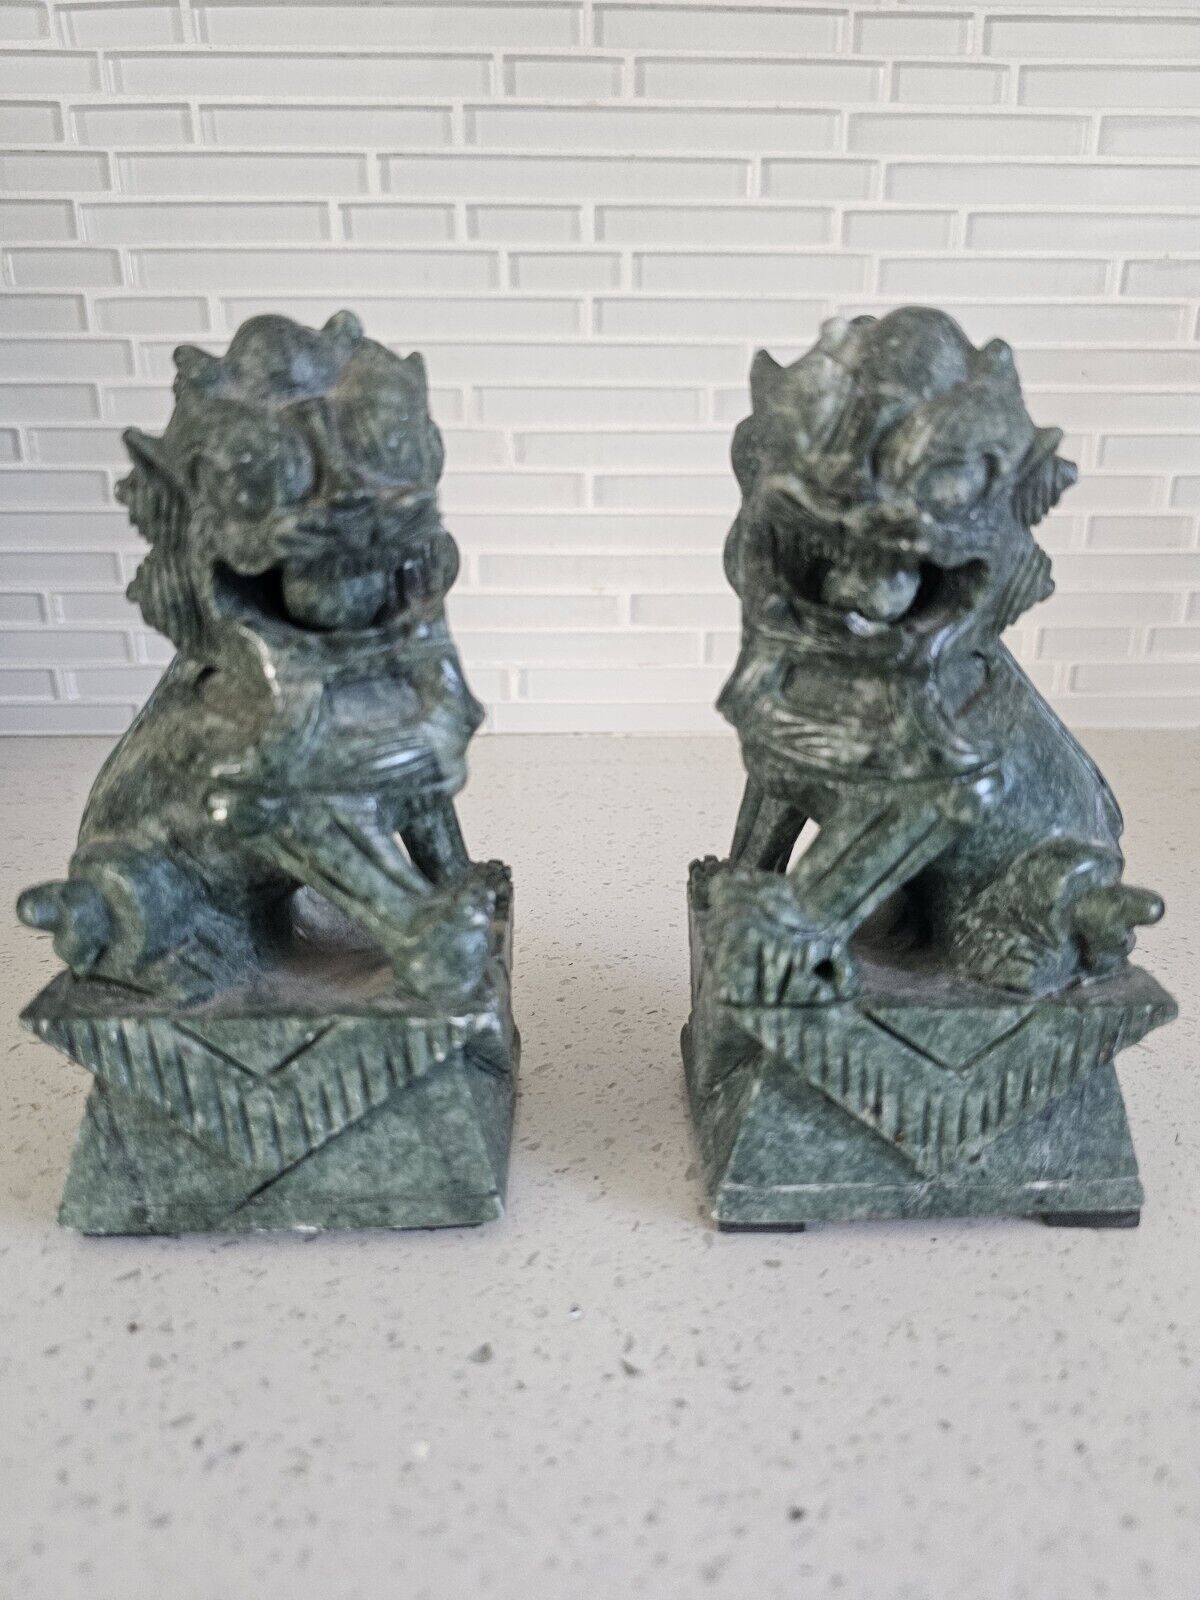 Chinese Jade Stone Carved Pair of Foo Dog Statues 6